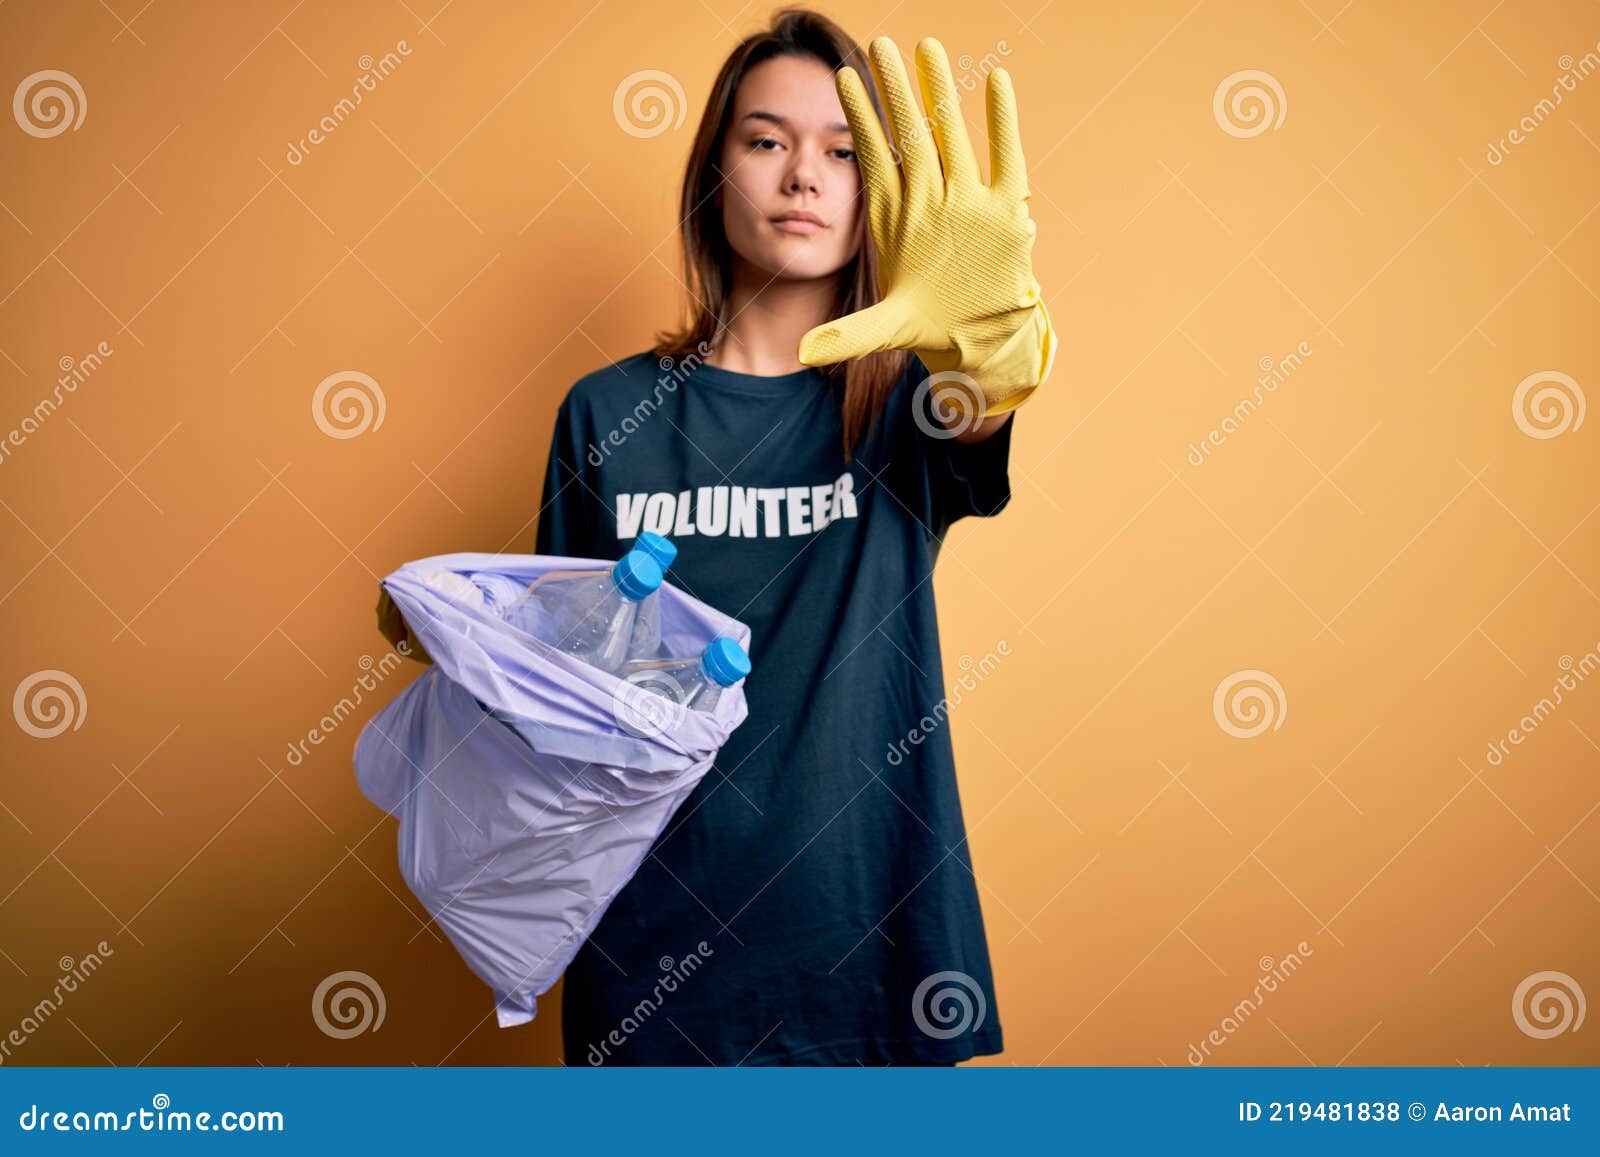 beautiful volunteer girl caring environment doing volunteering holding bag with rubish bottles with open hand doing stop sign with